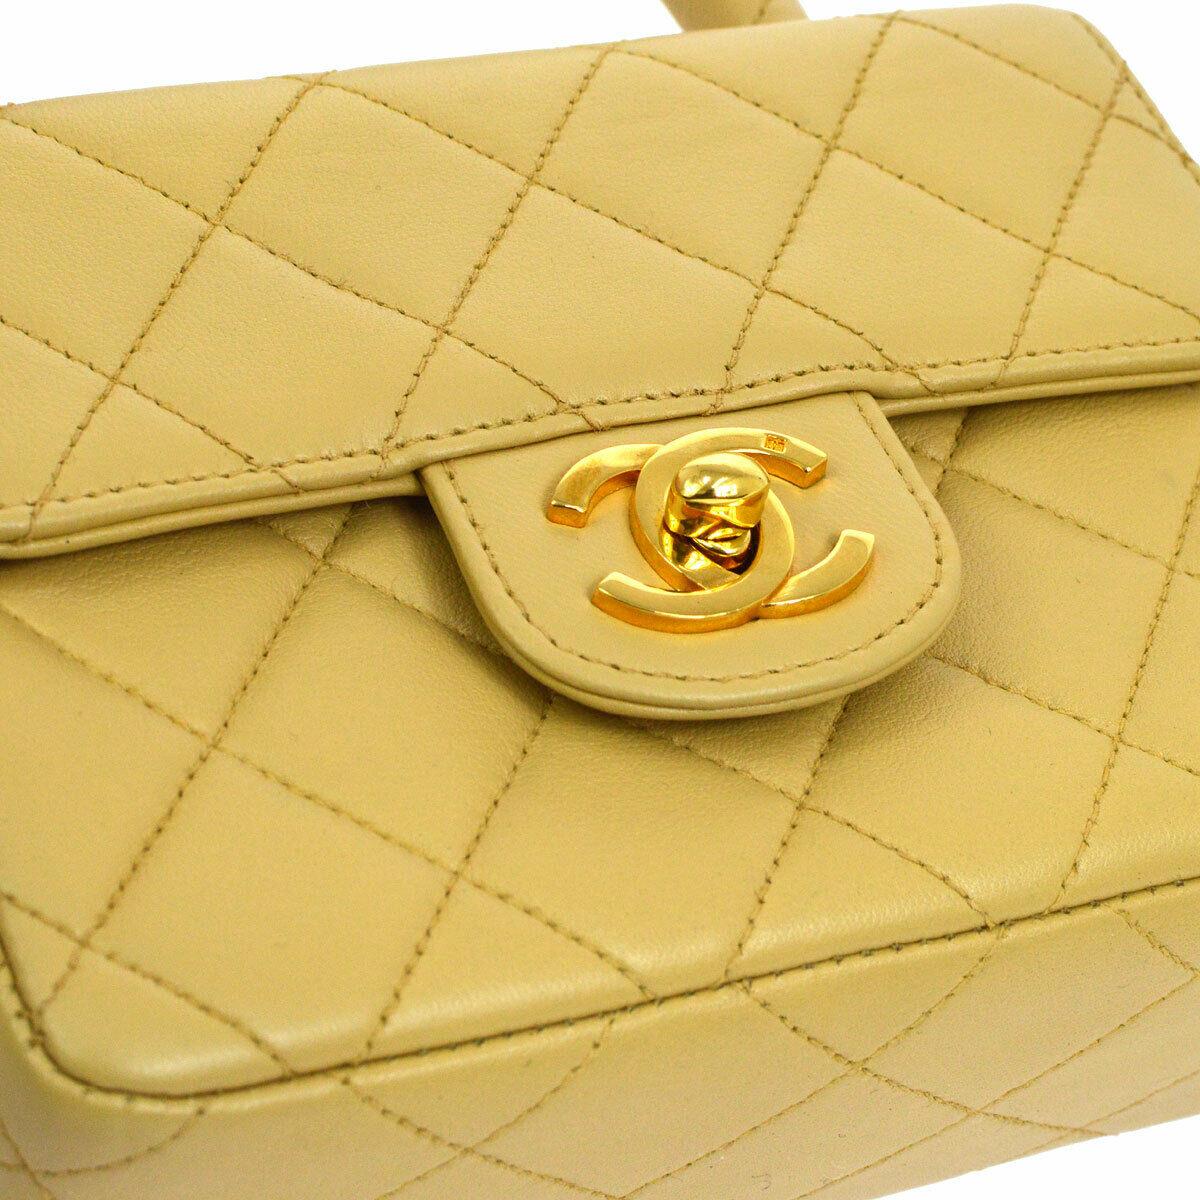 Chanel Nude Beige Tan Leather Mini Kelly Small Party Evening Top Handle Satchel Flap Bag

Lambskin
Gold tone hardware
Turn lock closure
Leather lining
Made in France
Handle drop 3